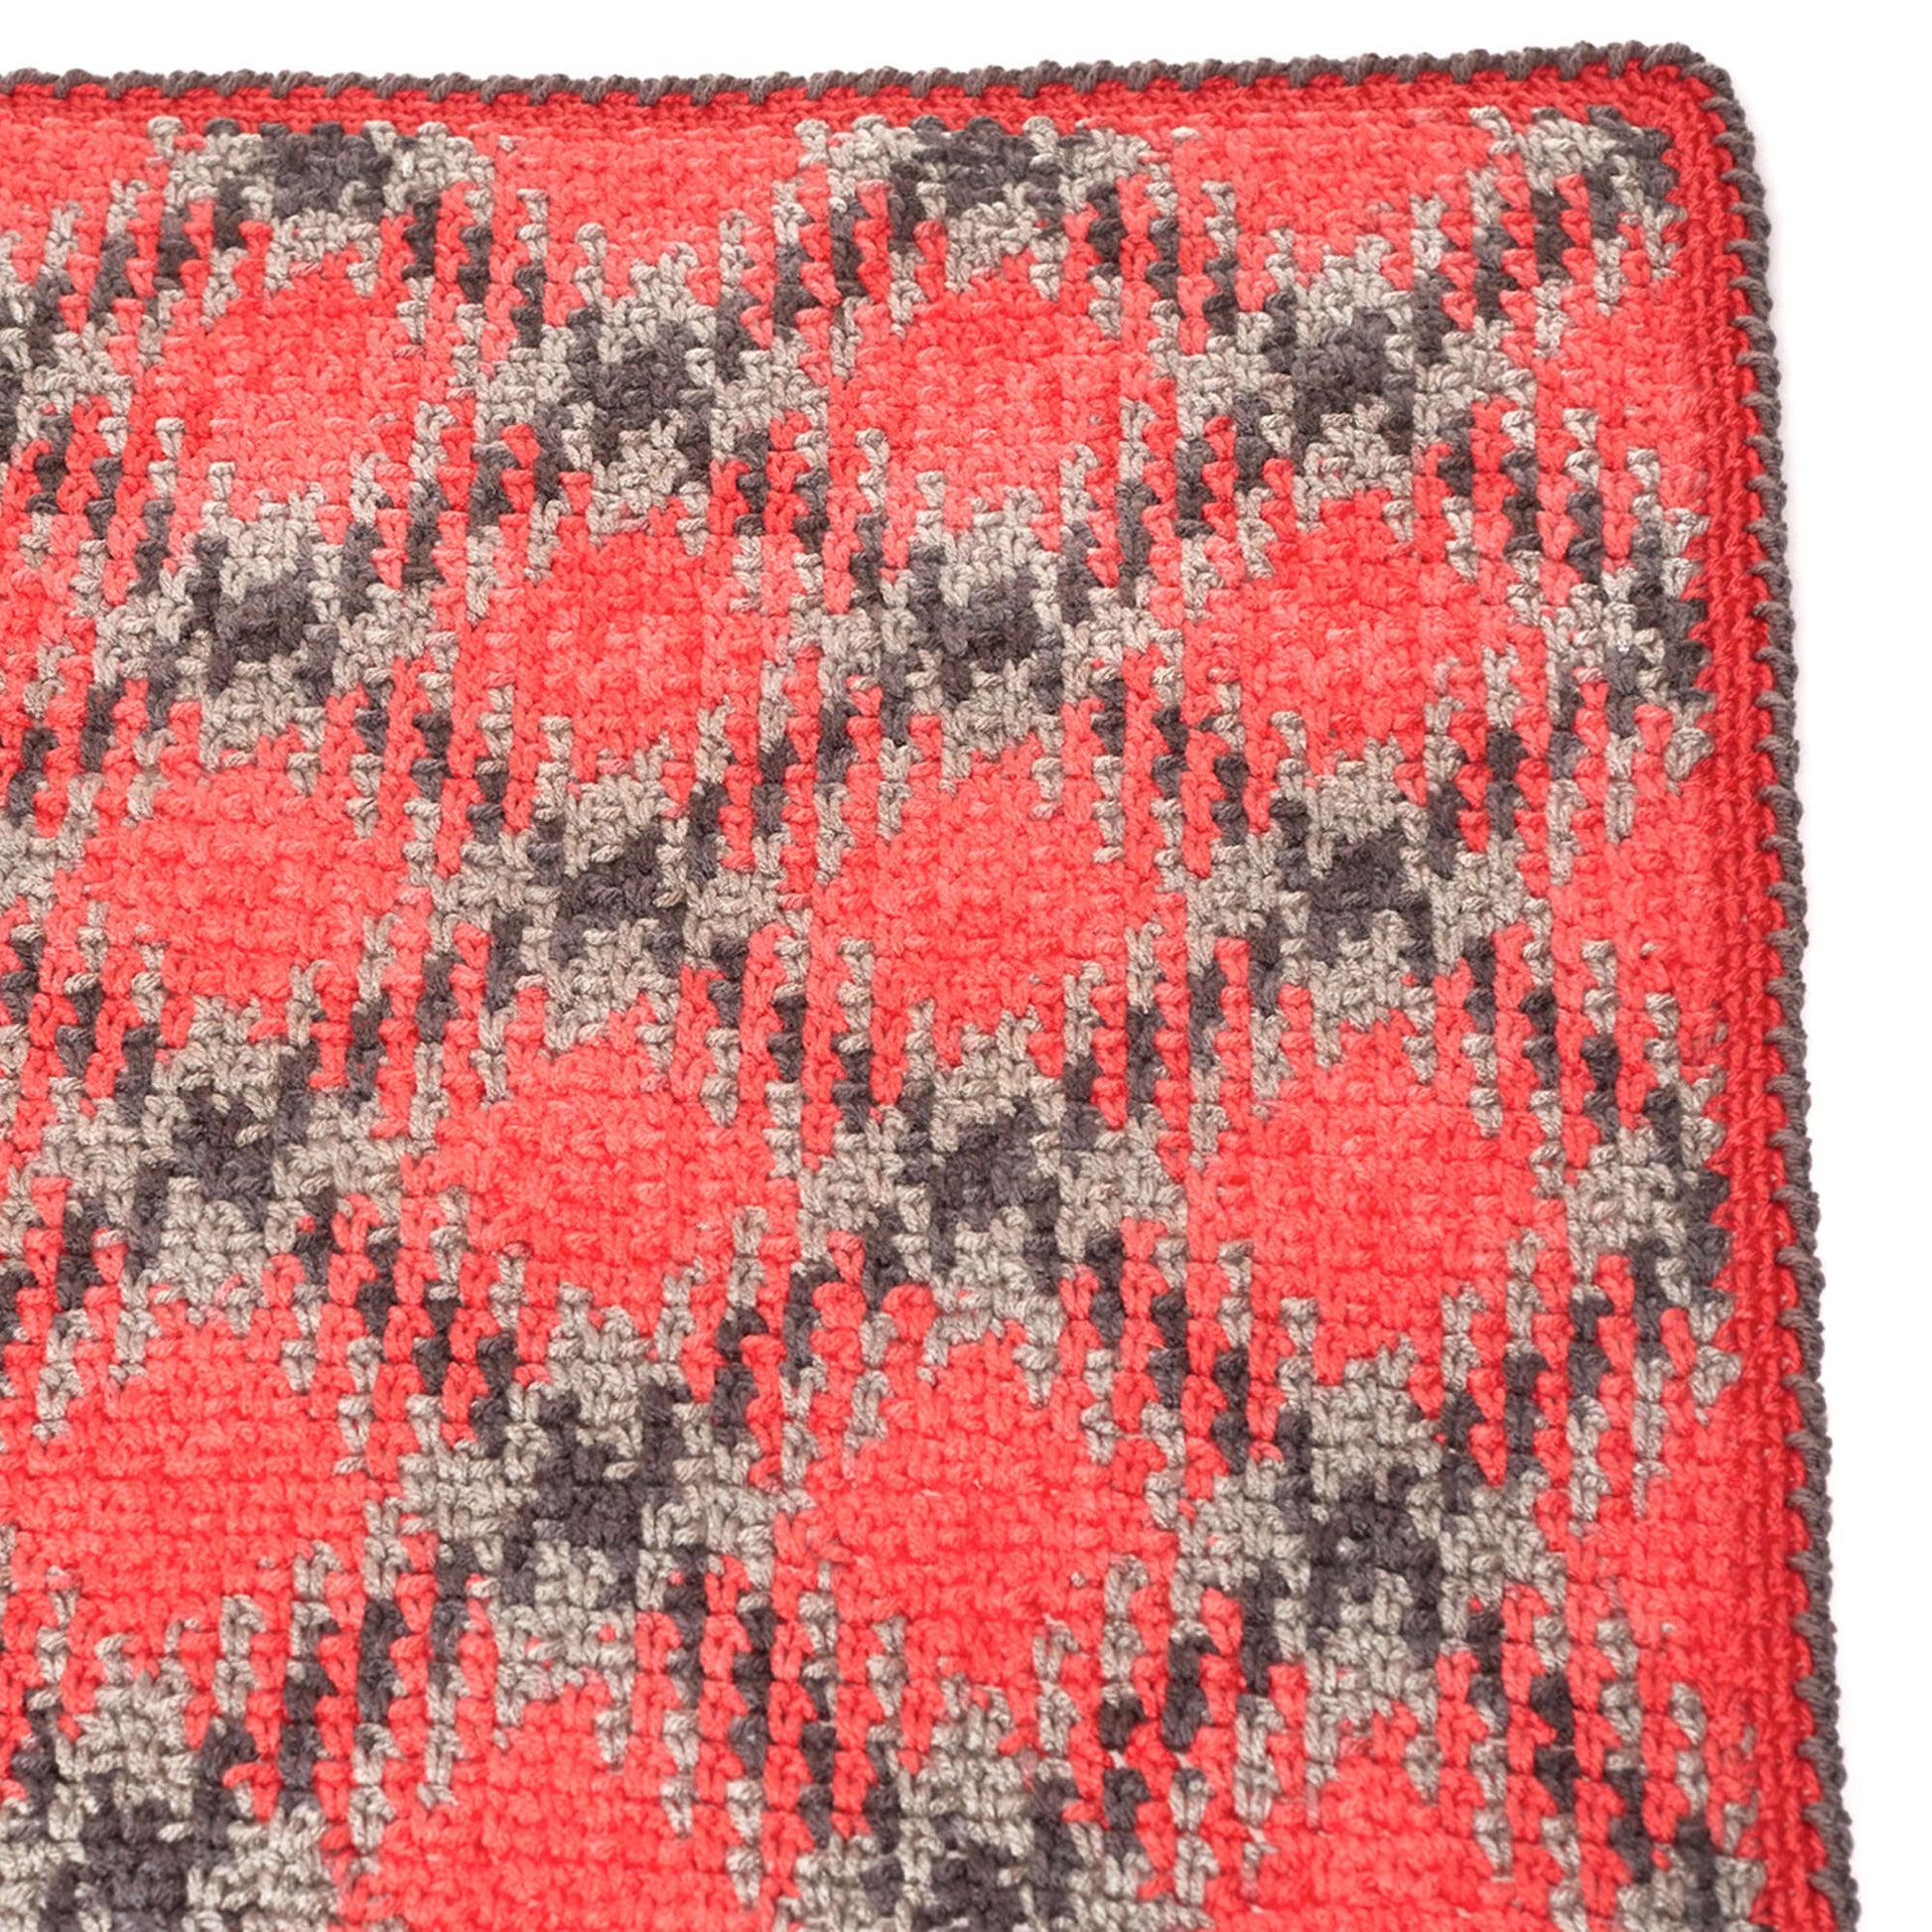 Free Red Heart Planned Pooling Argyle Throw Or Crochet Blanket Pattern